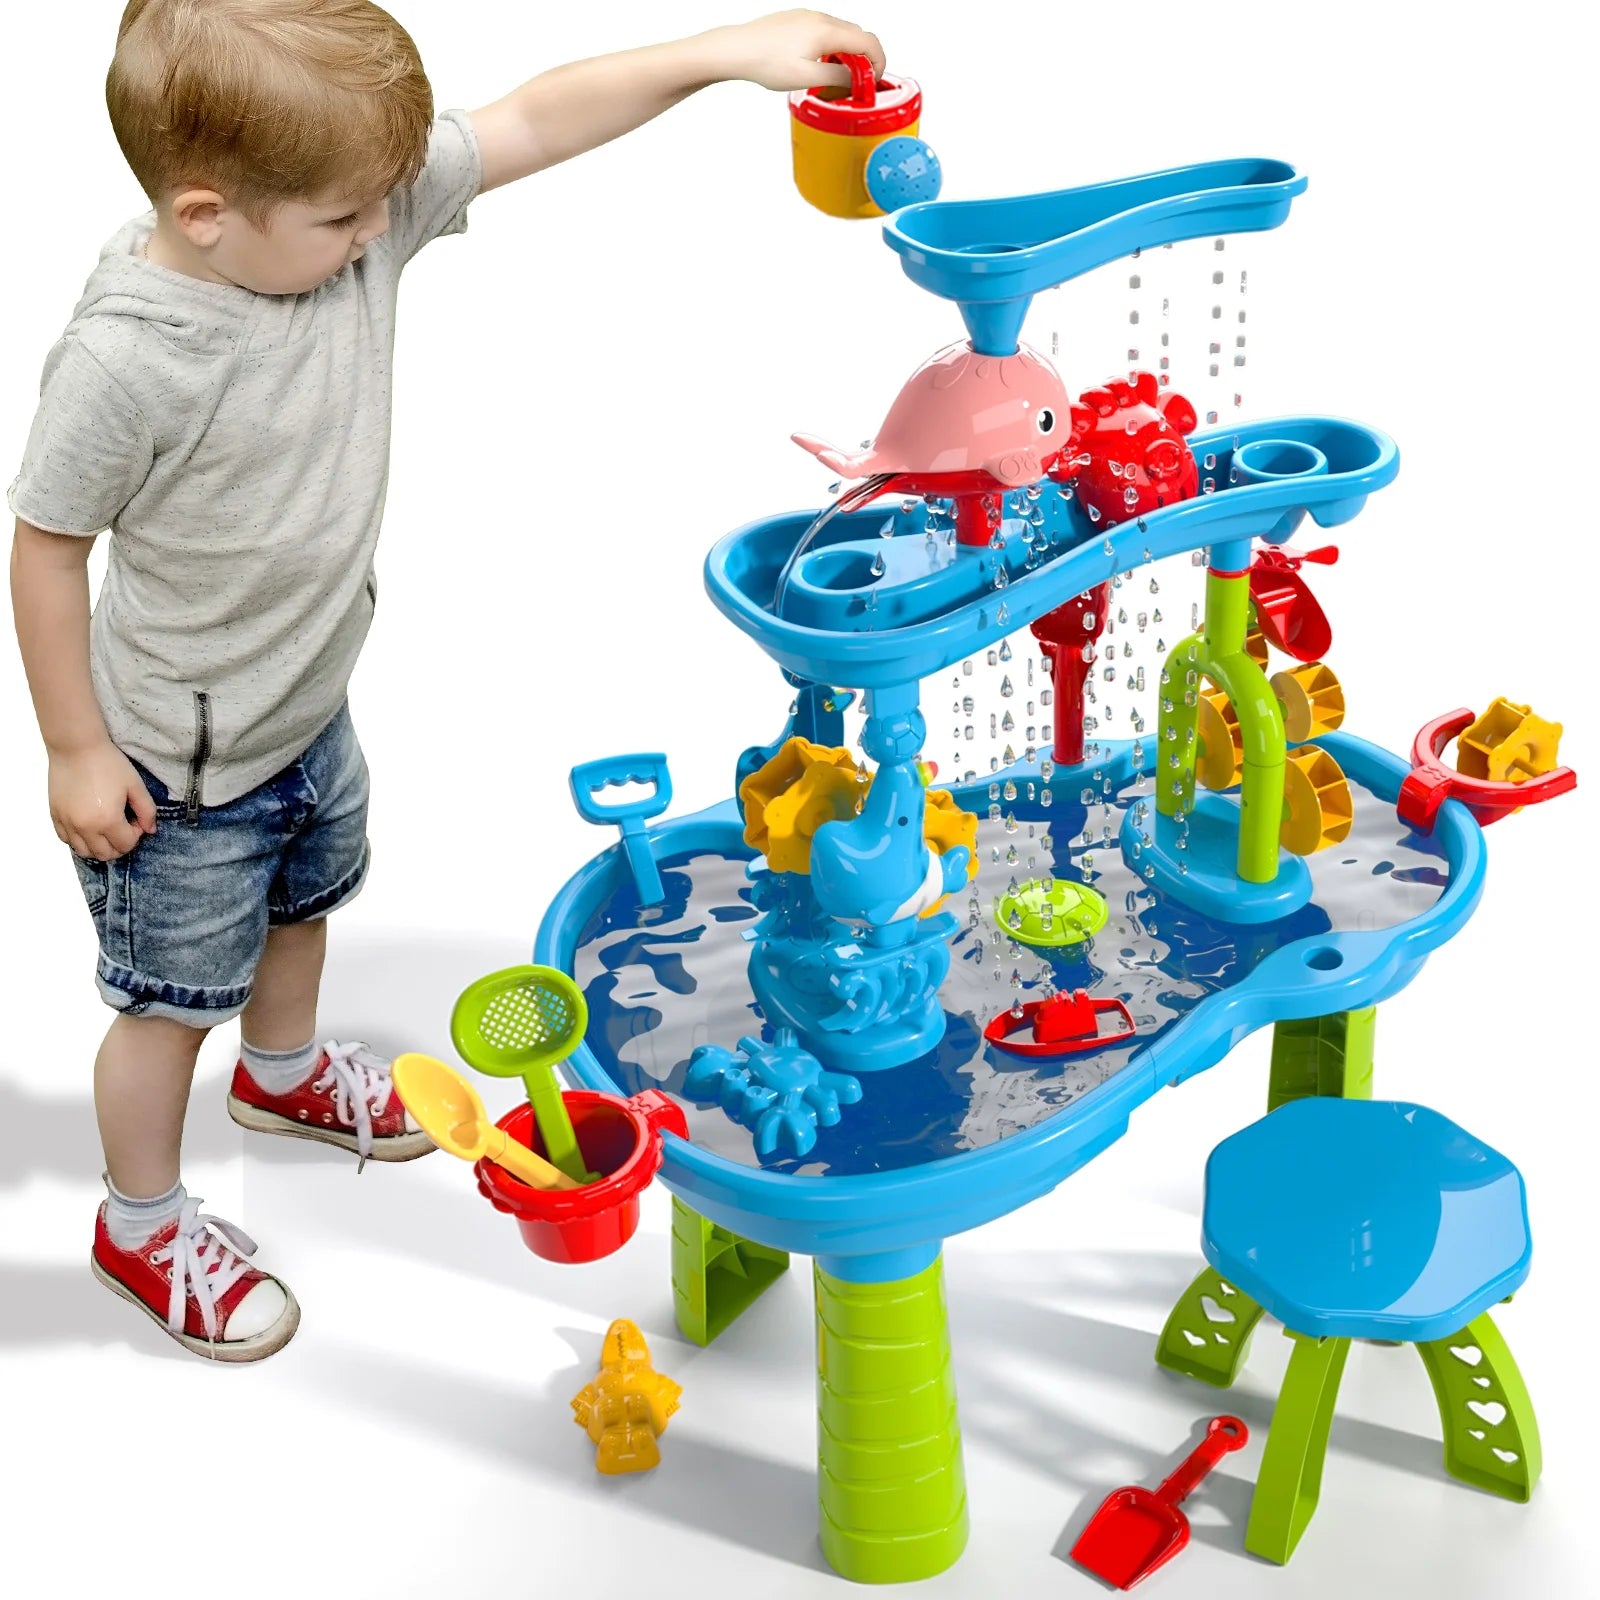 3-Tier Sand and Water Play Table